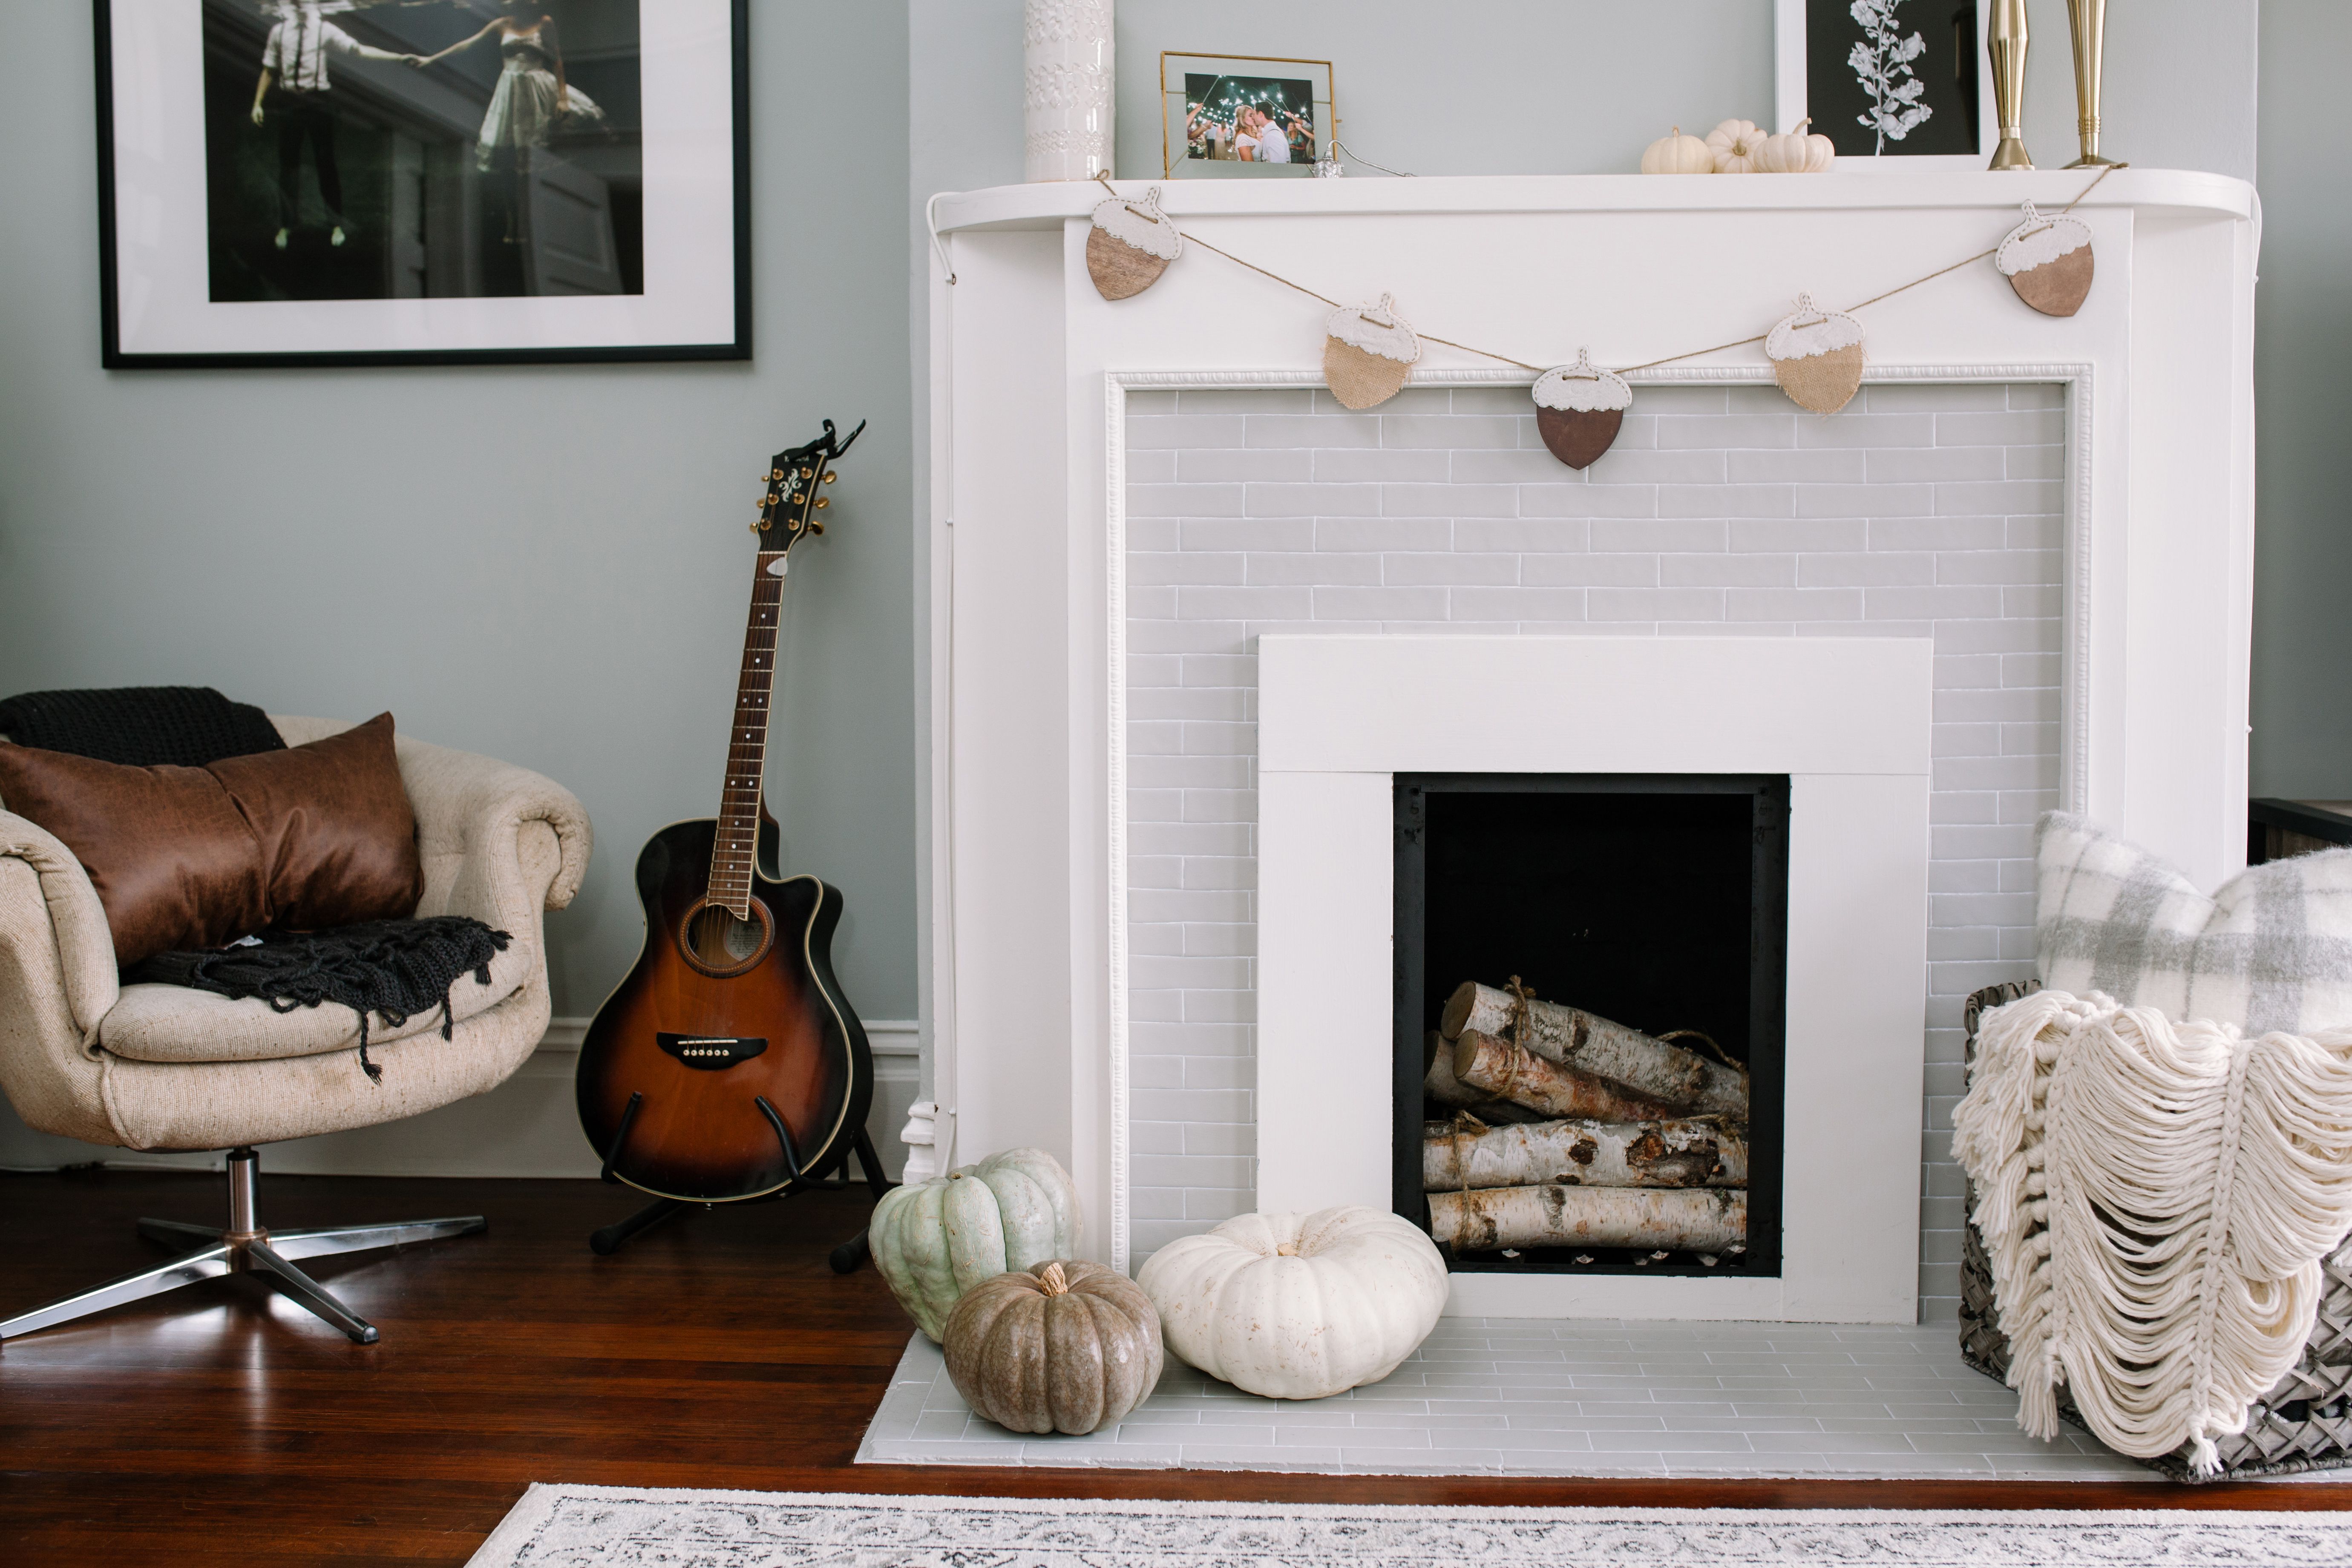 How to Build A Fireplace Surround Lovely 25 Beautifully Tiled Fireplaces